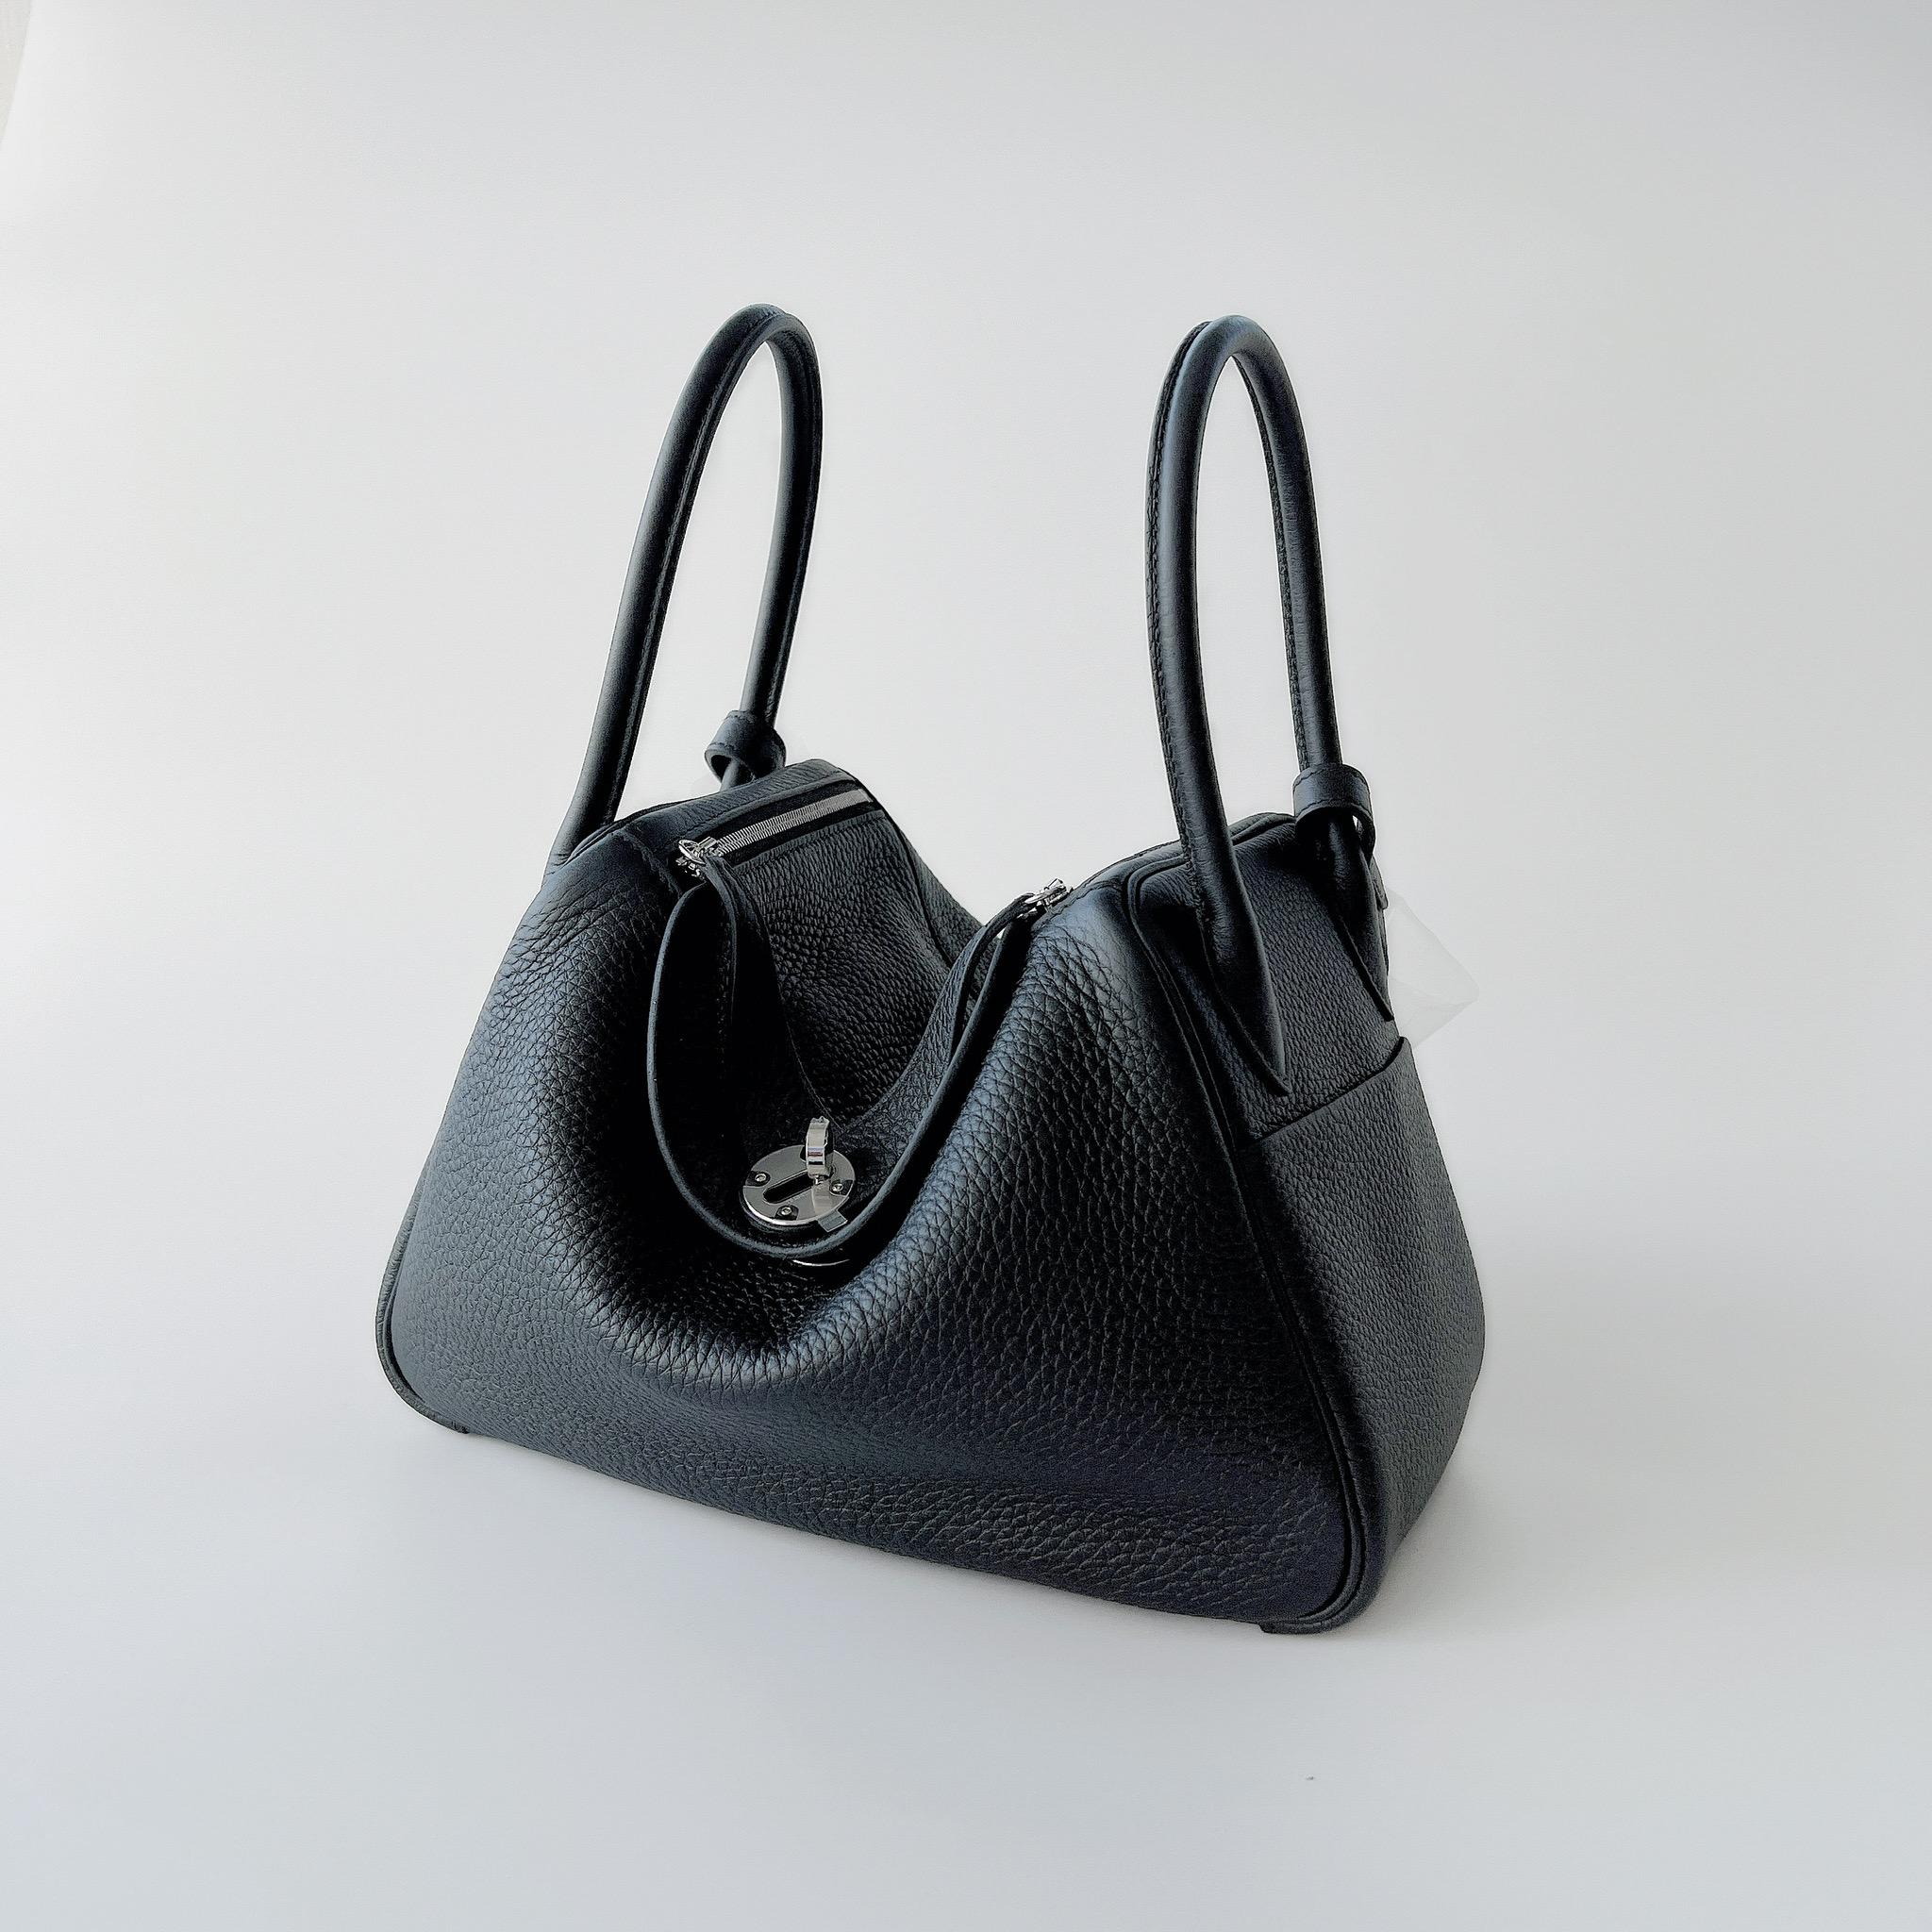 Shop this classic coloured Hermes Lindy 26 In Black Clemence Leather. It features Palladium Hardware which gives the bag a more younger and stylish look. The Lindy 26 is a fantastic size bag for everyday use and fits much more than the Mini Lindy.